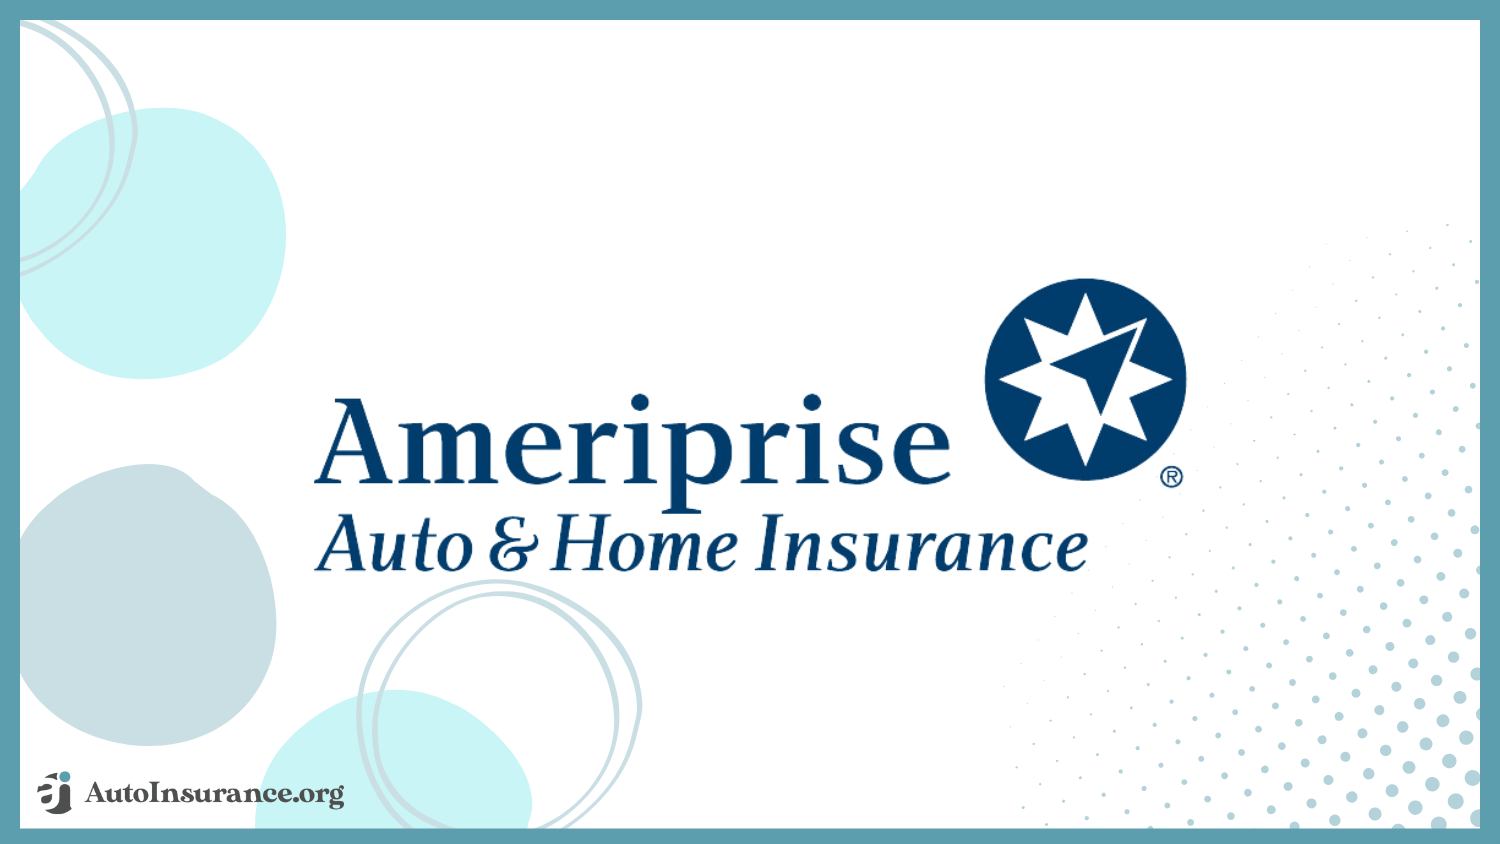 best auto insurance for emergency service workers: Ameriprise